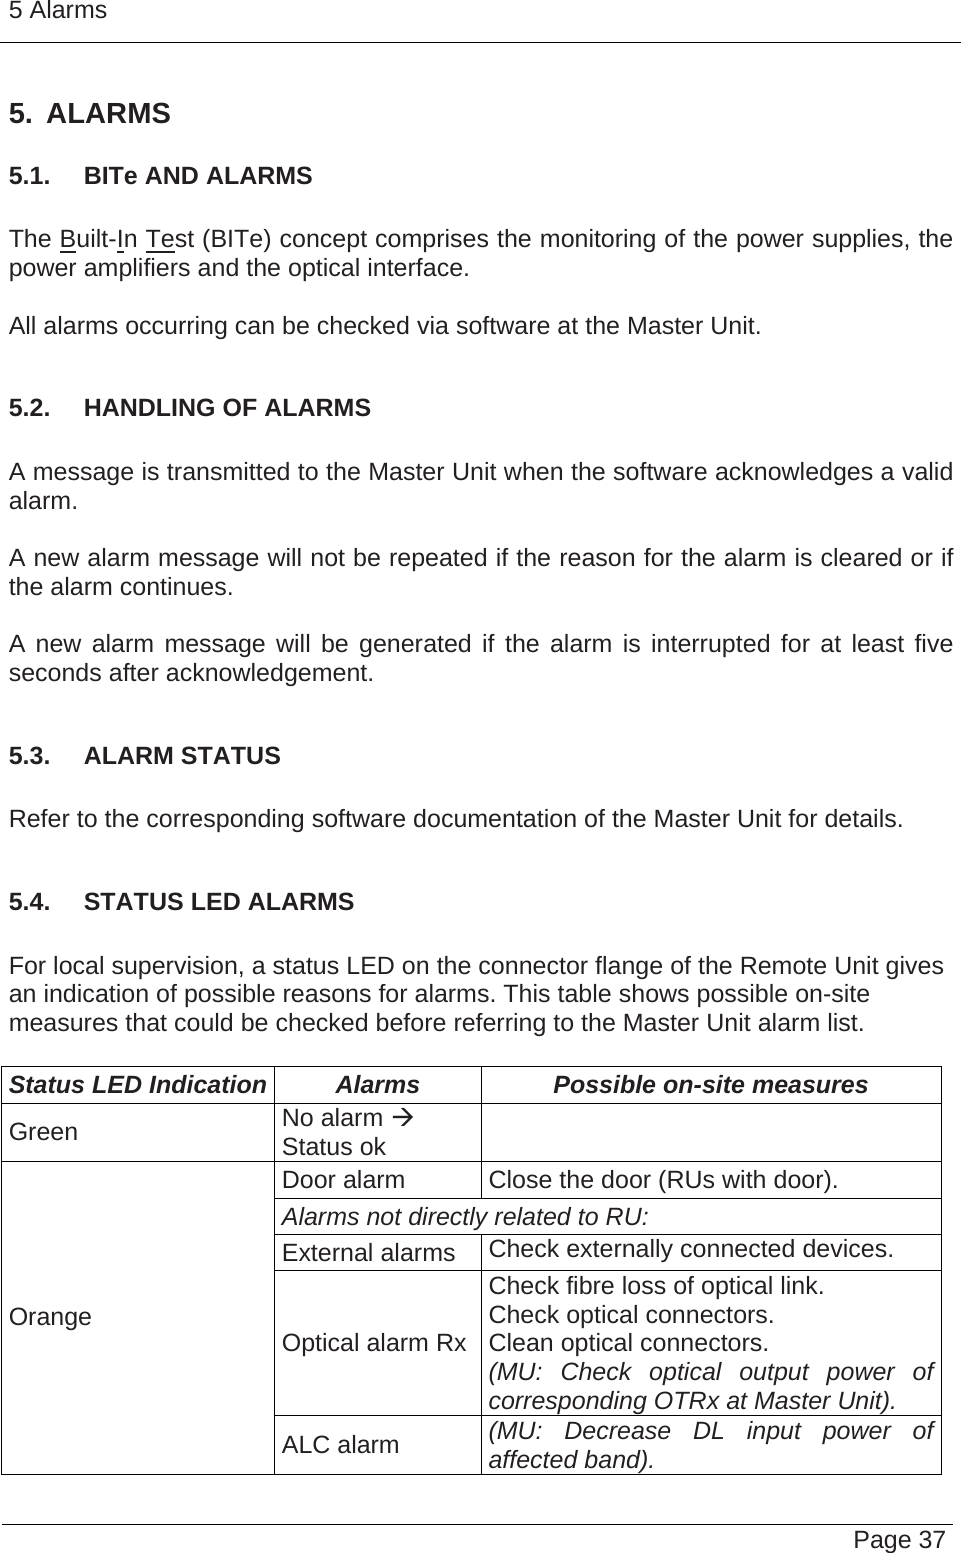 5 Alarms   Page 37 5. ALARMS 5.1.  BITe AND ALARMS  The Built-In Test (BITe) concept comprises the monitoring of the power supplies, the power amplifiers and the optical interface.  All alarms occurring can be checked via software at the Master Unit.  5.2.  HANDLING OF ALARMS  A message is transmitted to the Master Unit when the software acknowledges a valid alarm.  A new alarm message will not be repeated if the reason for the alarm is cleared or if the alarm continues.  A new alarm message will be generated if the alarm is interrupted for at least five seconds after acknowledgement.  5.3.  ALARM STATUS  Refer to the corresponding software documentation of the Master Unit for details.  5.4.  STATUS LED ALARMS  For local supervision, a status LED on the connector flange of the Remote Unit gives an indication of possible reasons for alarms. This table shows possible on-site measures that could be checked before referring to the Master Unit alarm list.  Status LED Indication  Alarms  Possible on-site measures Green  No alarm Æ Status ok   Door alarm  Close the door (RUs with door). Alarms not directly related to RU:  External alarms  Check externally connected devices. Optical alarm Rx Check fibre loss of optical link. Check optical connectors. Clean optical connectors. (MU: Check optical output power of corresponding OTRx at Master Unit). Orange ALC alarm  (MU: Decrease DL input power of affected band). 